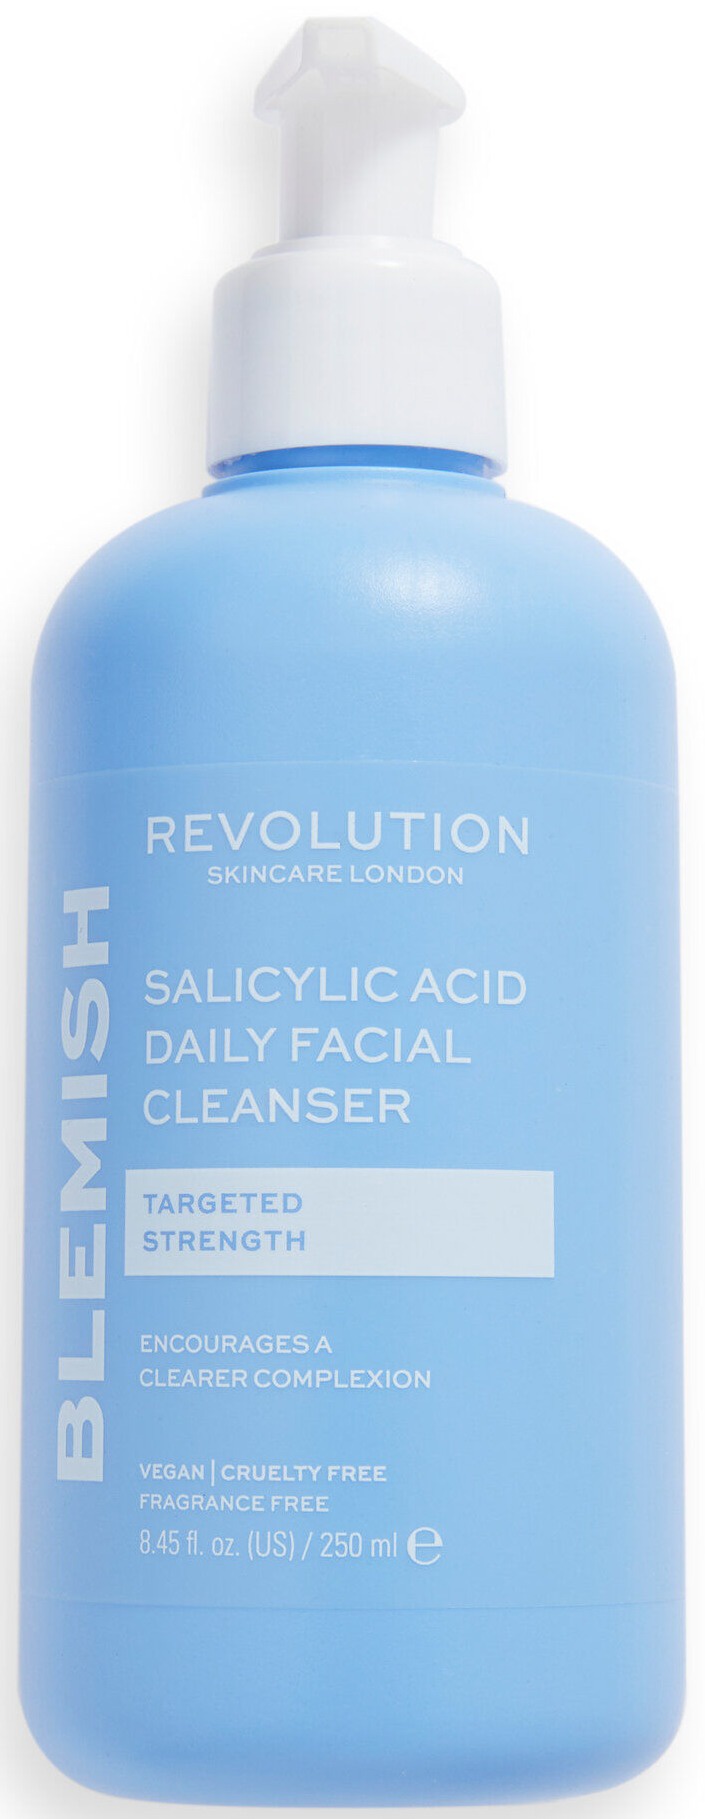 Revolution Skincare Blemish Salicylic Acid Daily Facial Cleanser